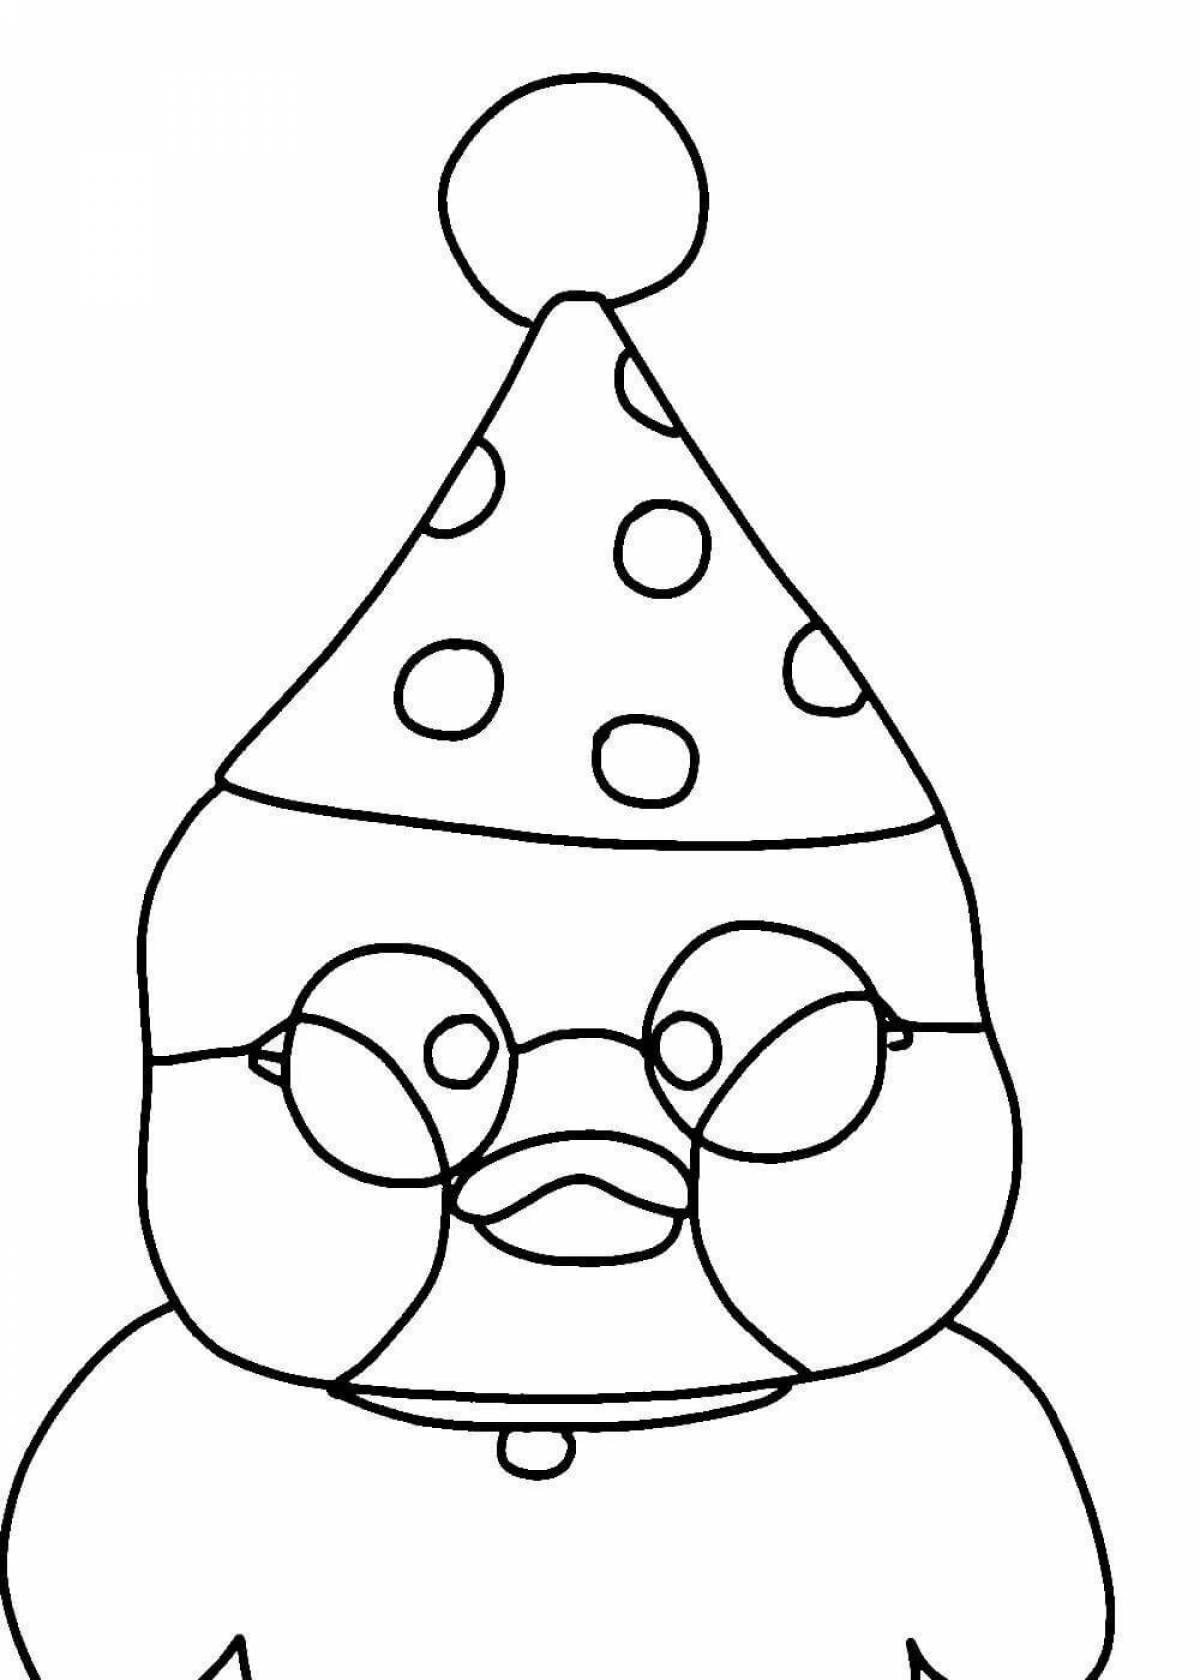 Lalafanfan crazy duck house coloring page